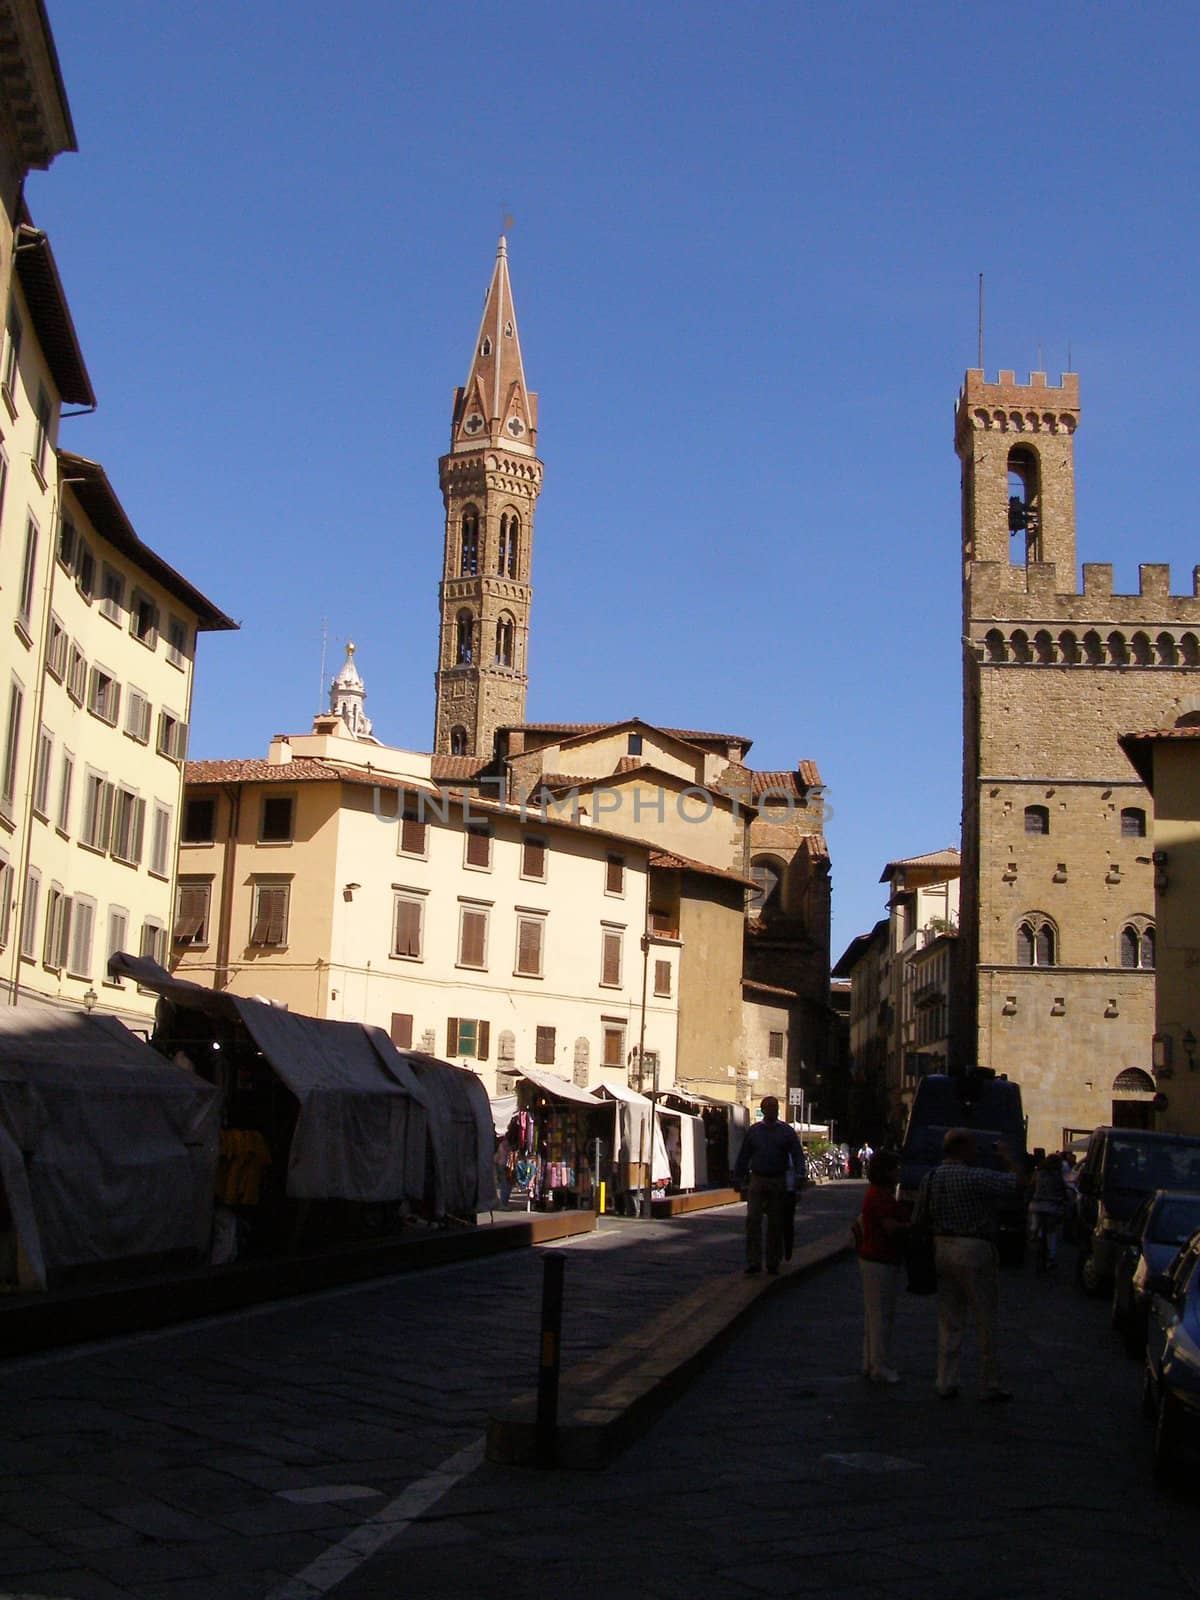 Florence, medieval heritage town in Italy